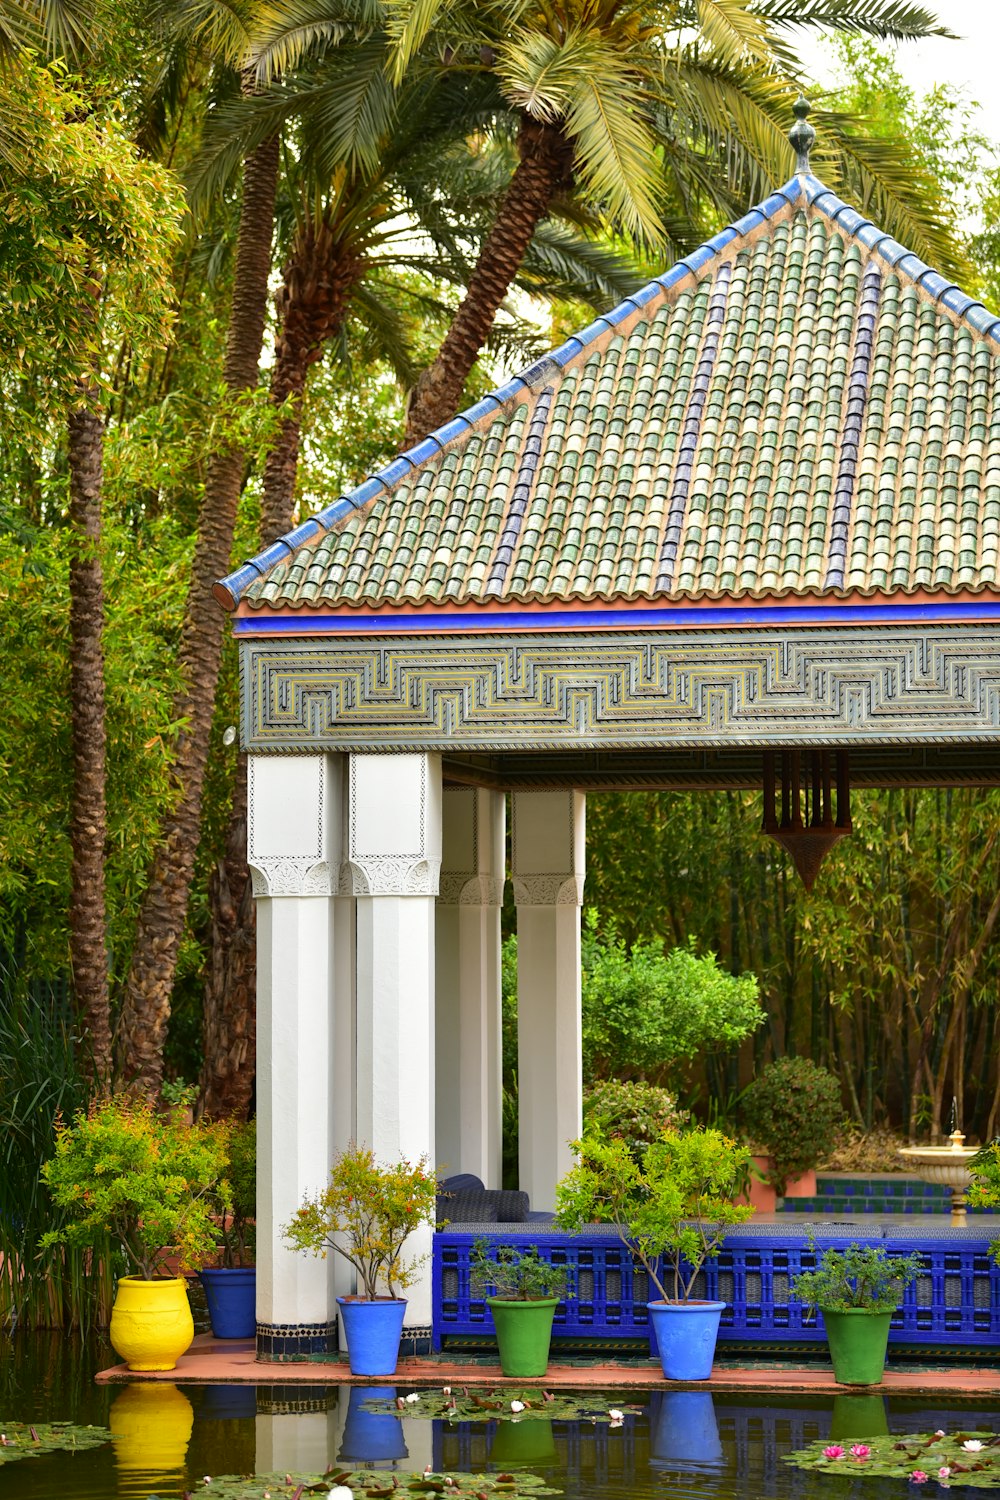 a gazebo in a garden with water lilies and palm trees